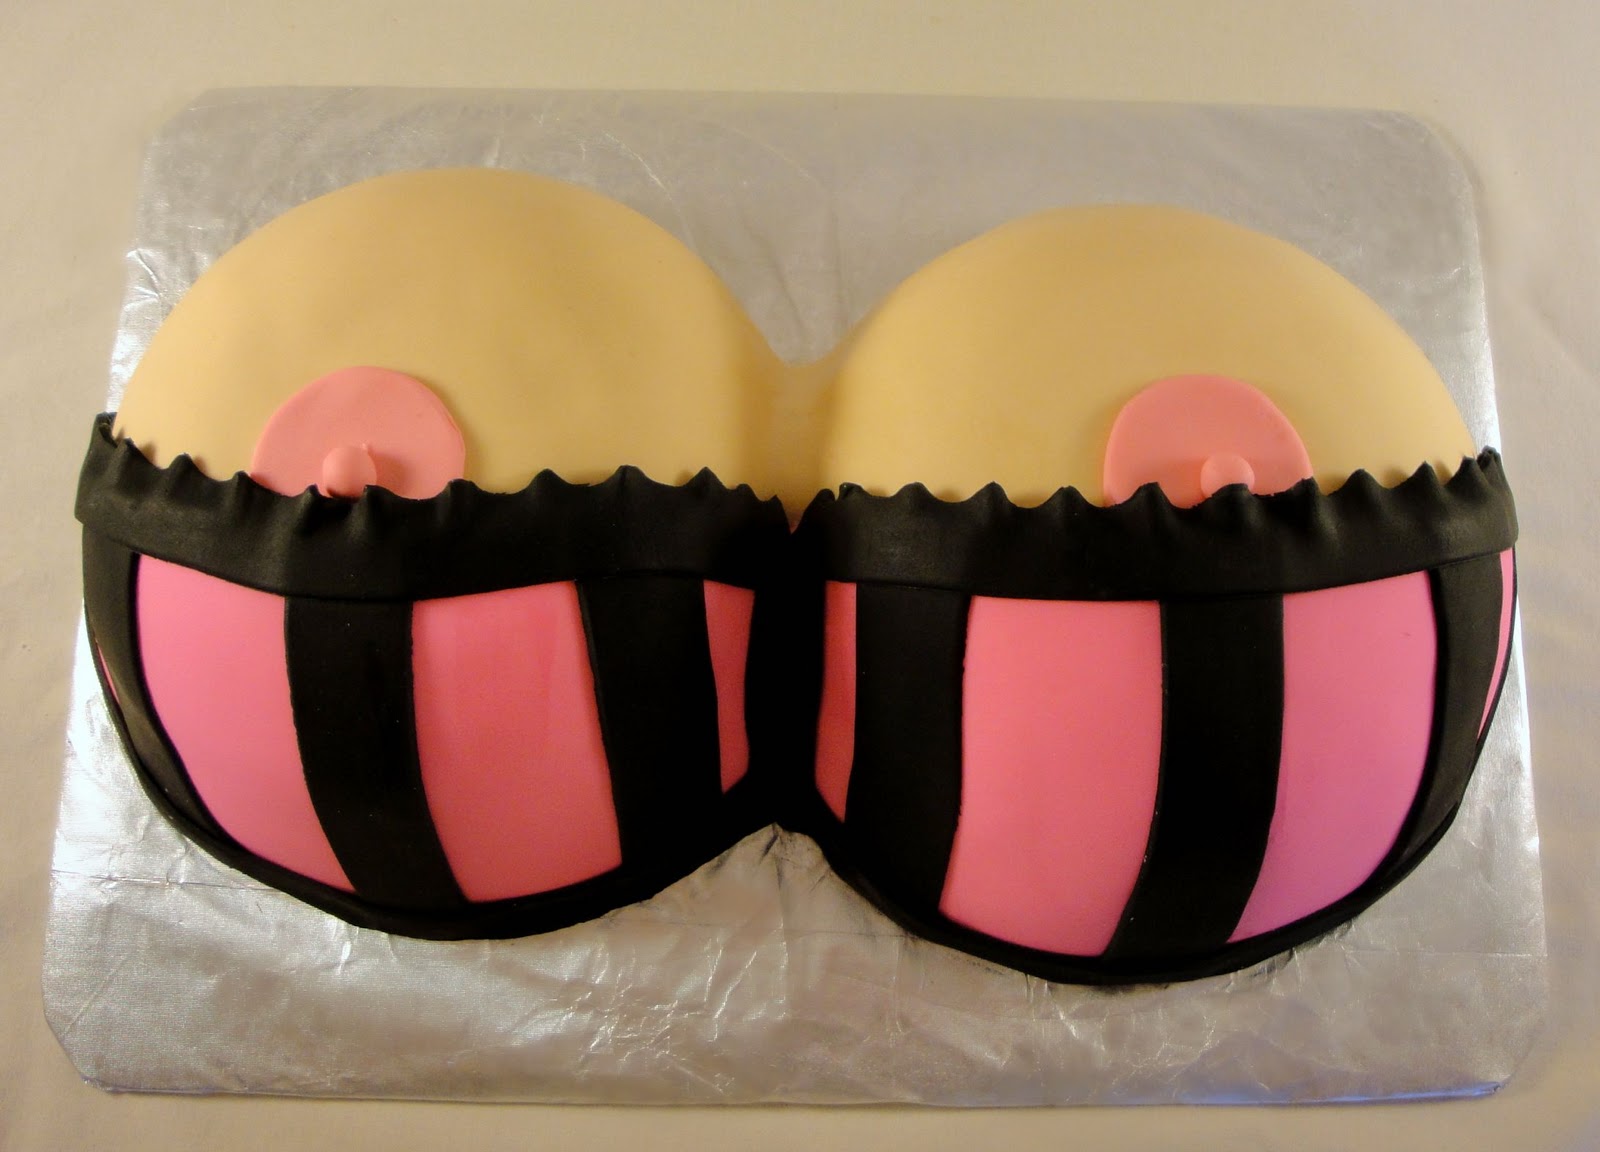 How To Make A Booby Cake